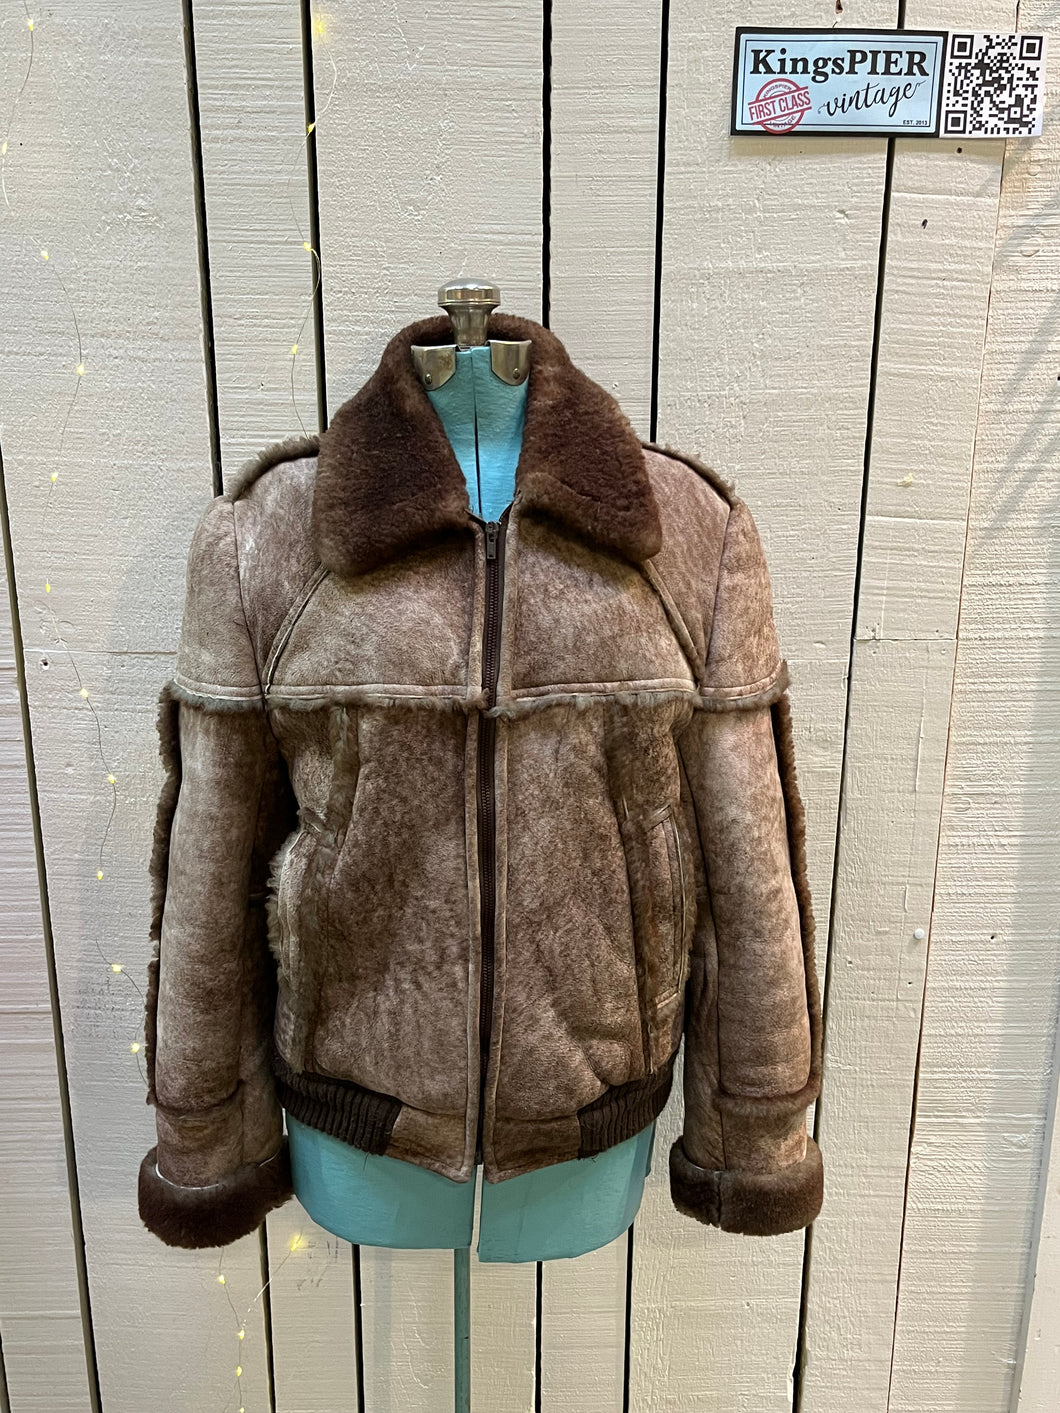 Vintage Outlook Fashions LTD shearling bomber jacket with zipper closure and two front pockets and two inside pockets.

Made in Canada
Chest 42”